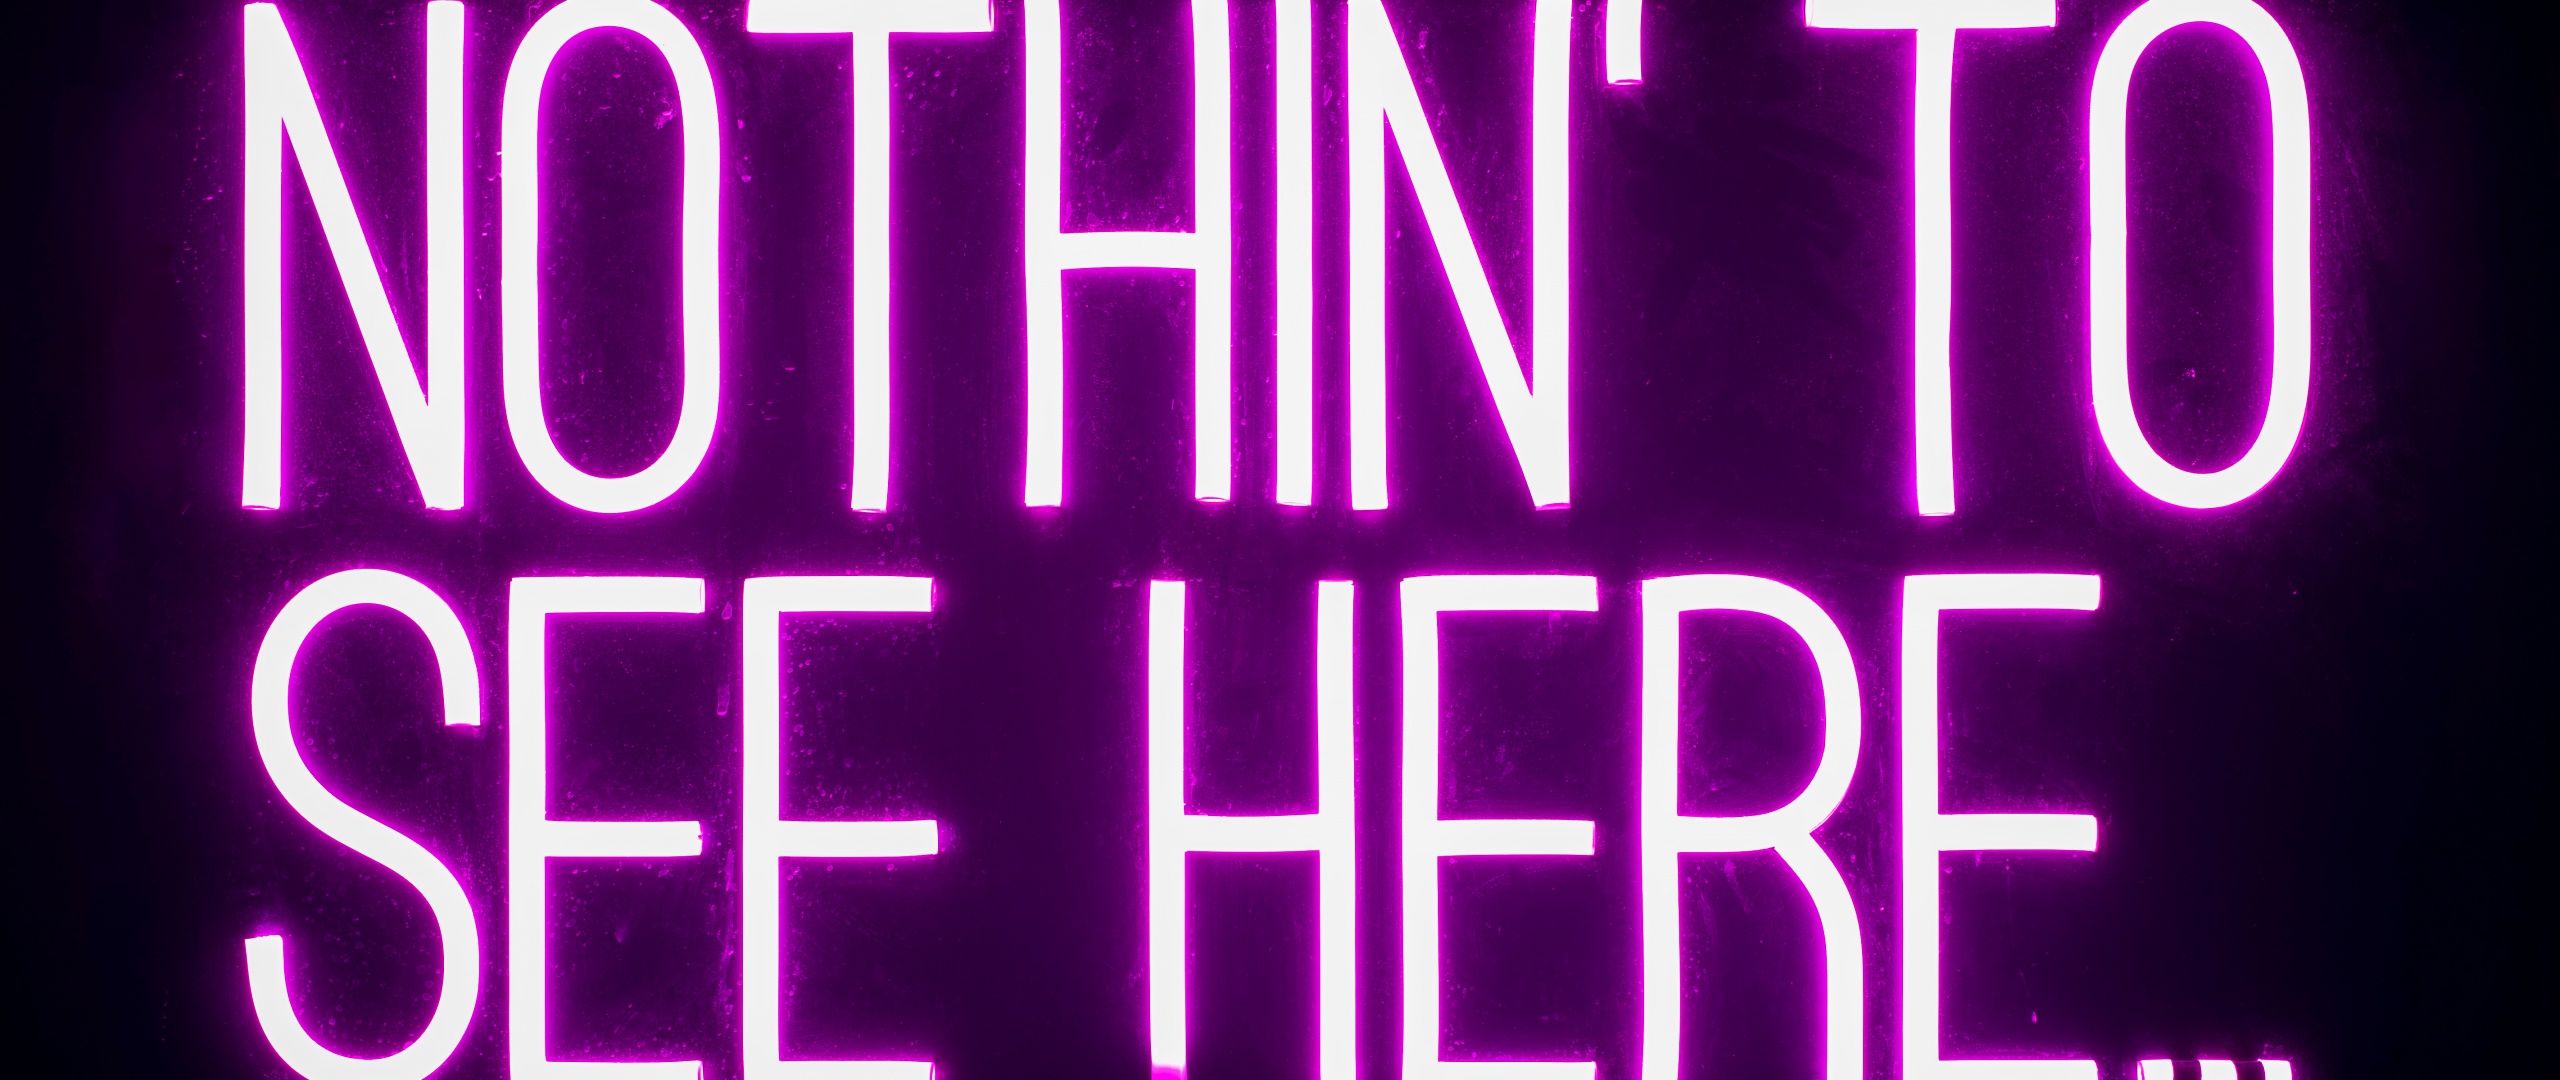 Olivia Steele  Nothing To See Here 2018  Available for Sale  Artsy   Cover photos Hypebeast wallpaper Neon lighting